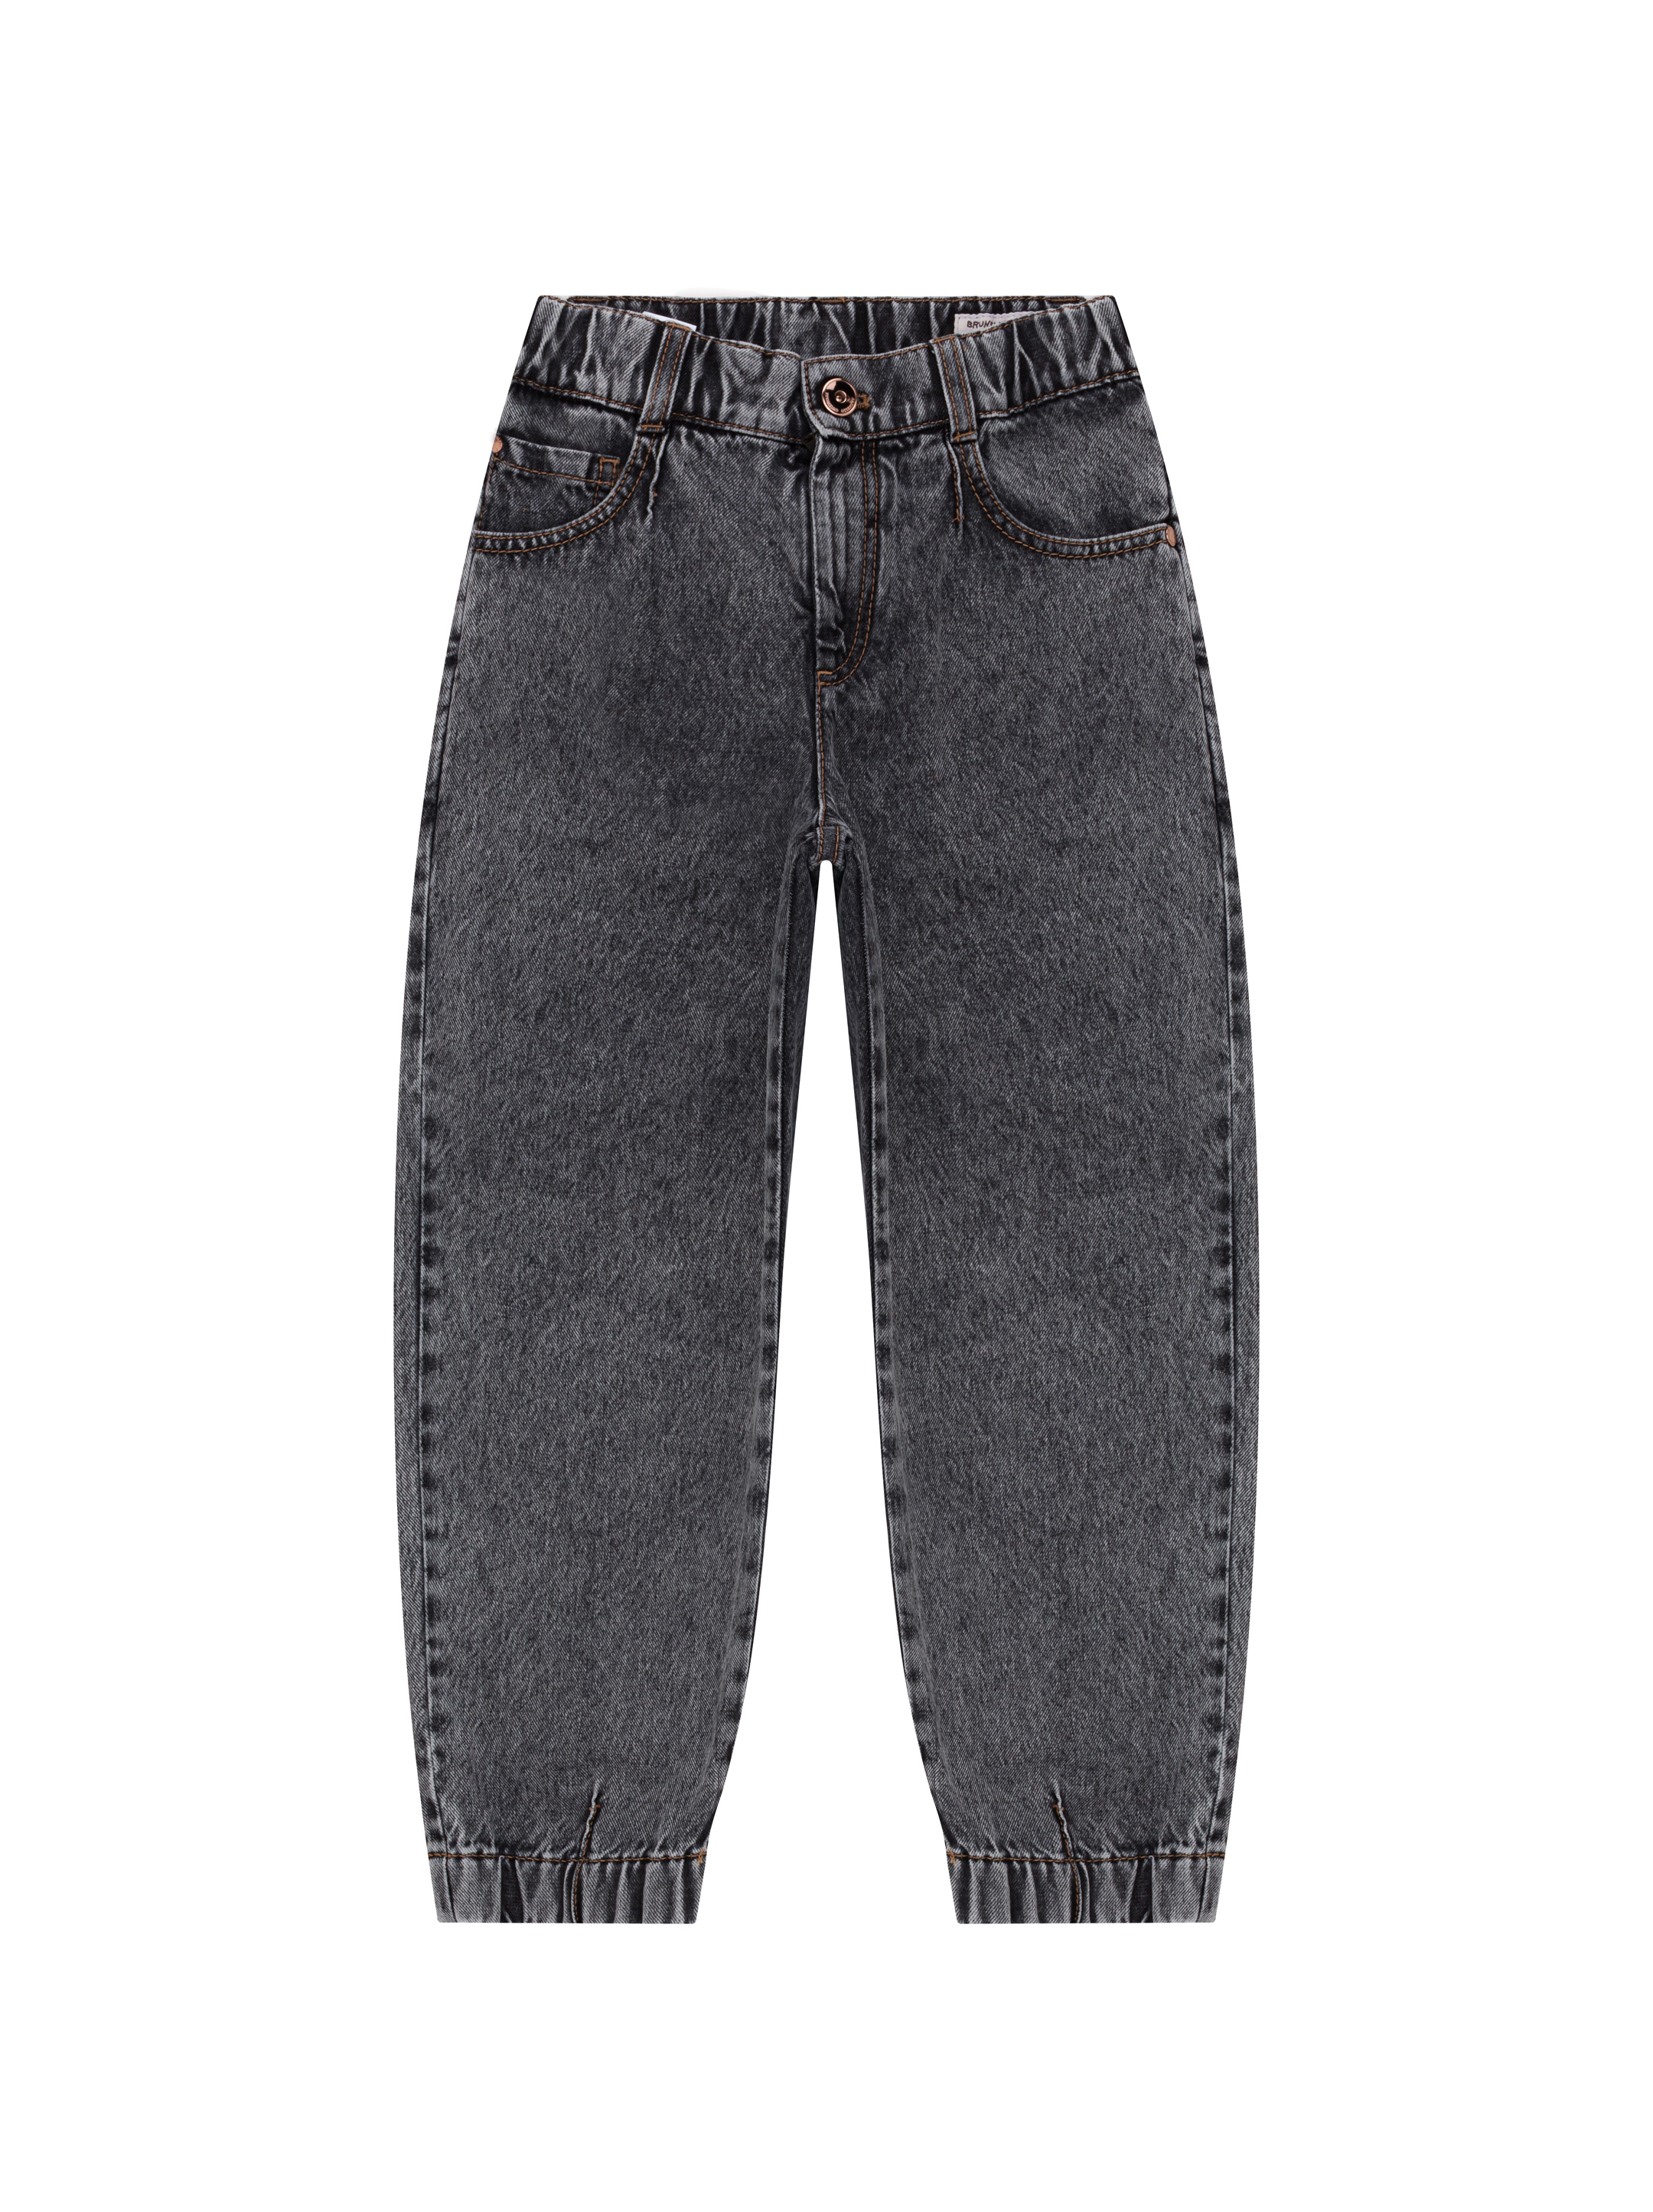 Brunello Cucinelli kids' Denim joggers - buy for 173475 KZT in the official  Viled online store, art. BH188P453B.C8303_8Y_232